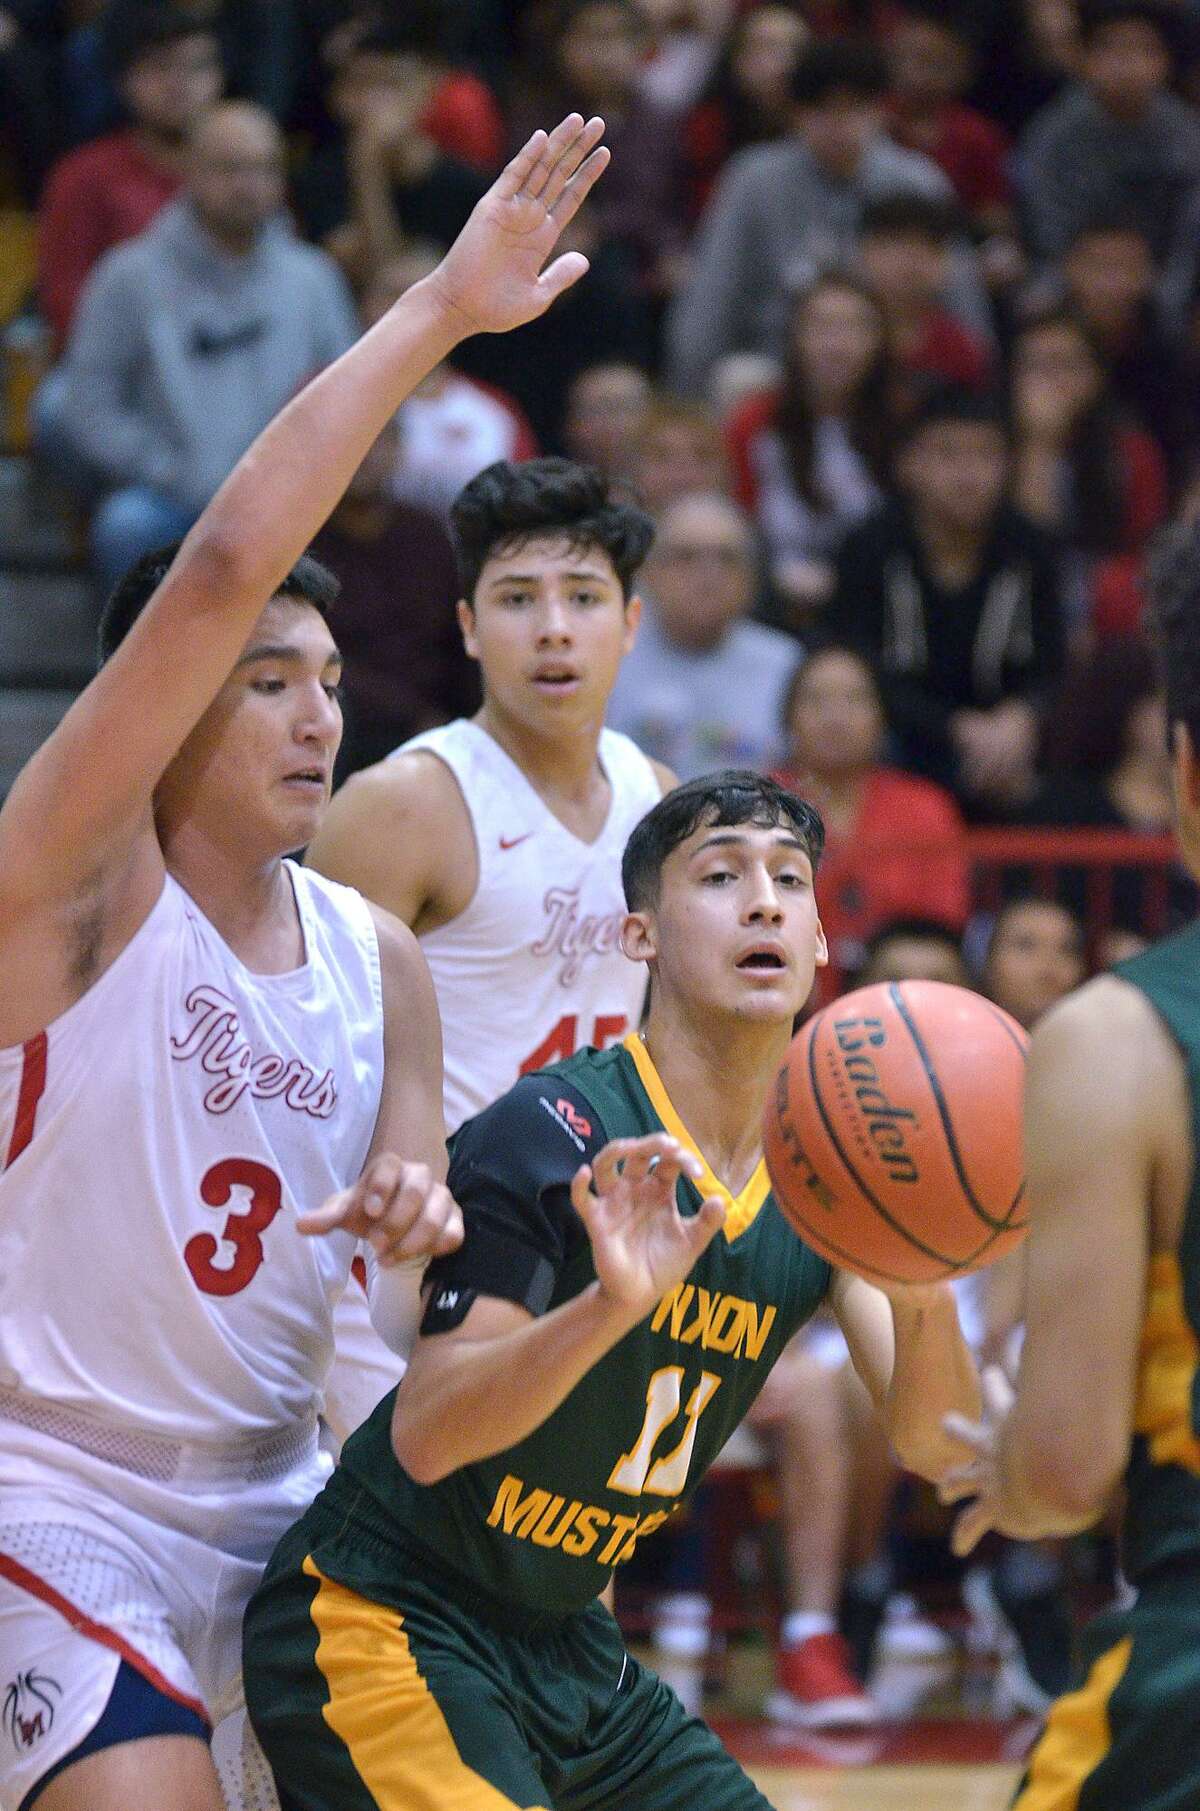 Joel Pena and Nixon fell to Deer Park 73-63 in the Pride of Texas Tournament title match Saturday. Pena was named to the all-tournament team.